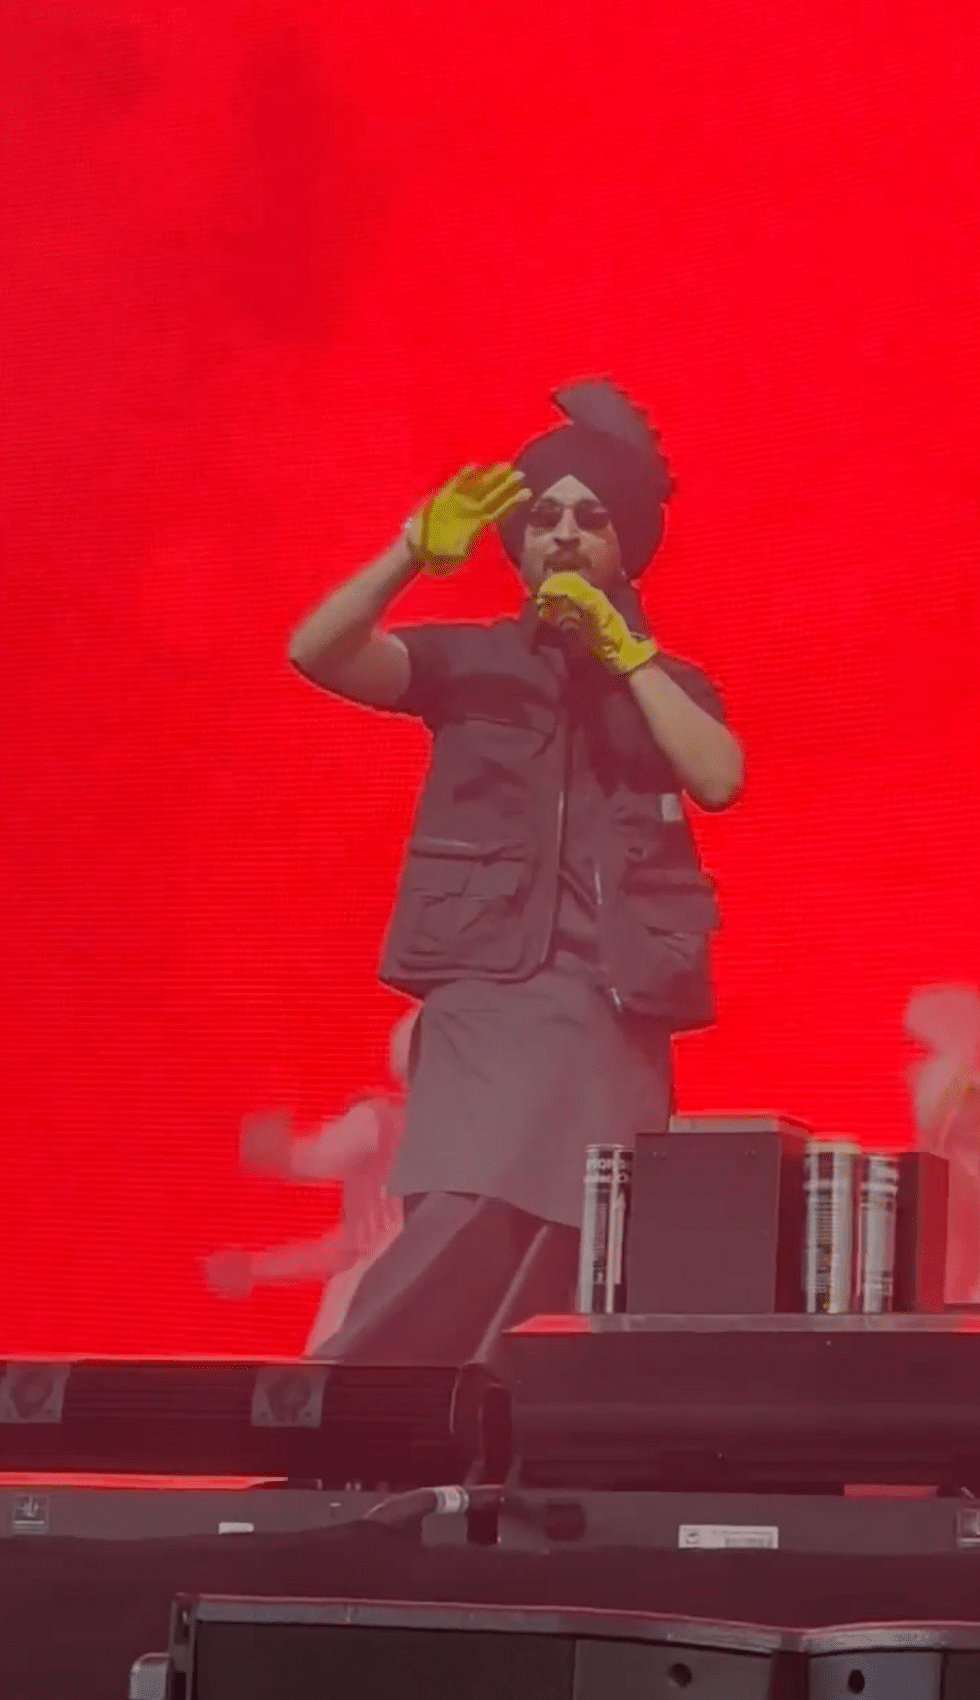 Sarina and Simranjit were in the front row at  Coachella to watch their favourite artist Diljit Dosanjh perform.